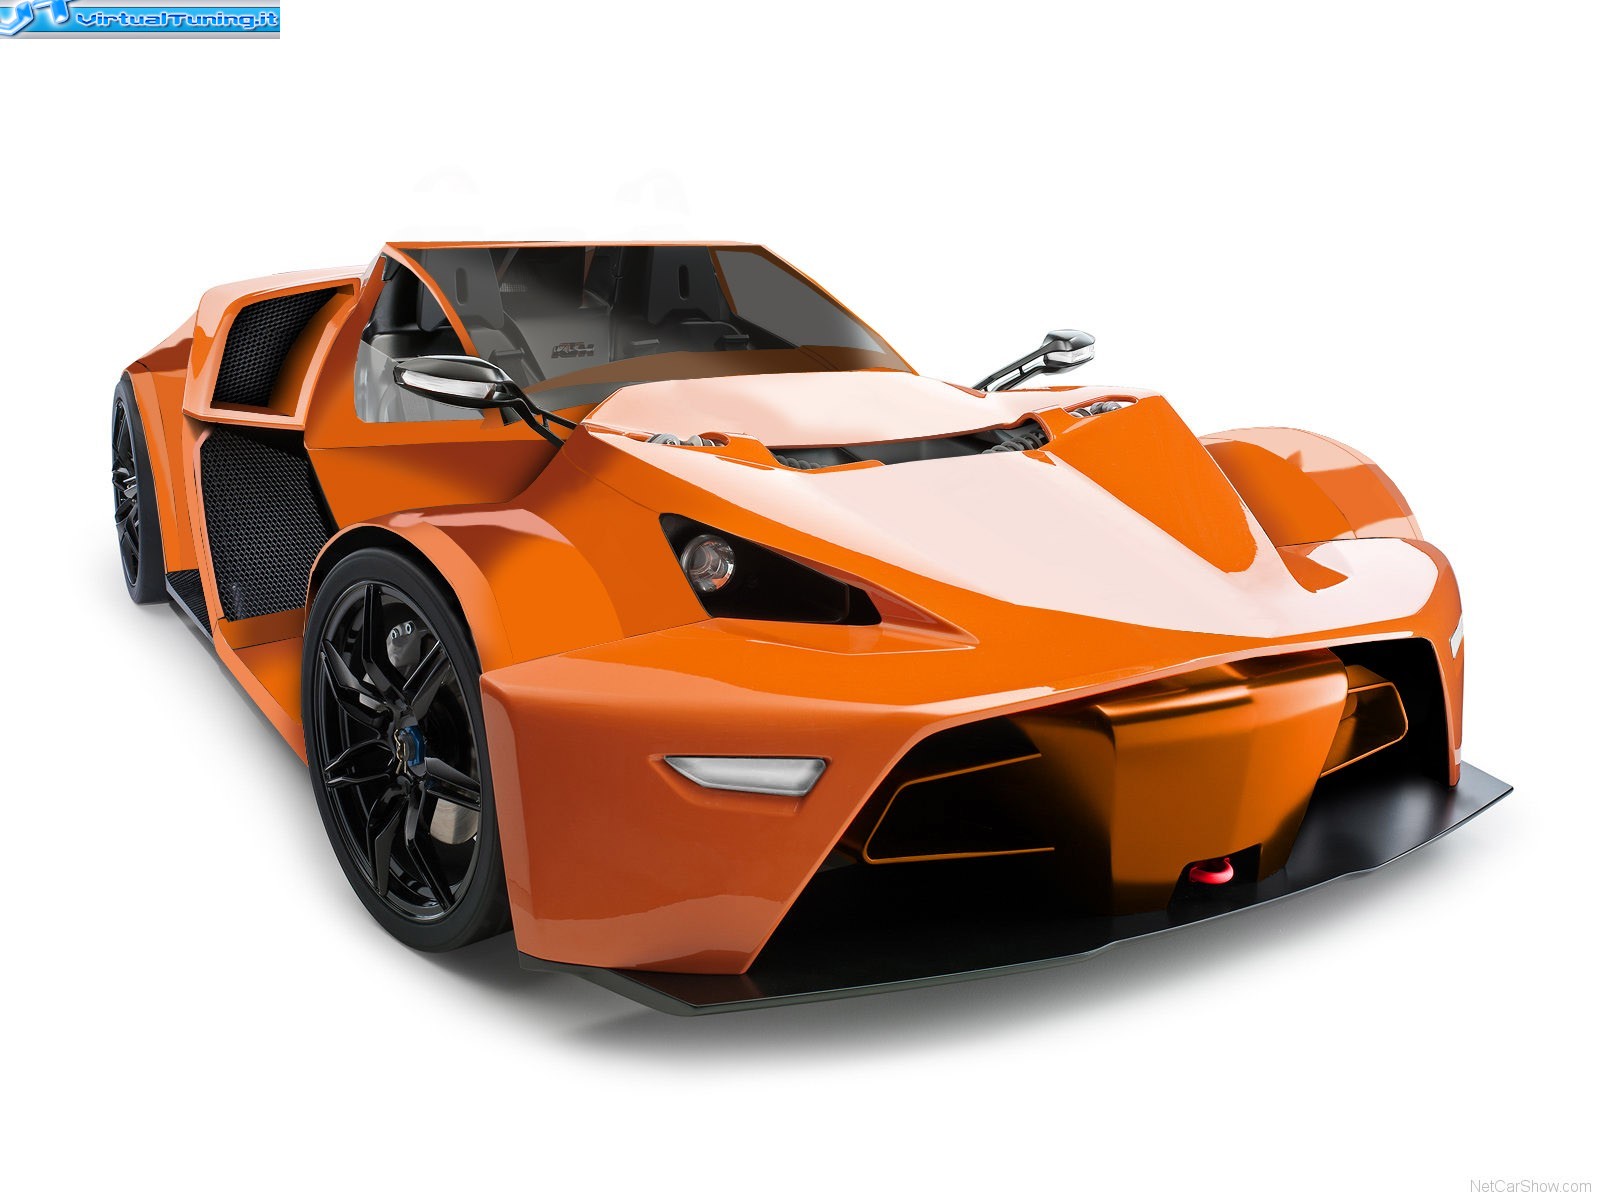 VirtualTuning KTM X Bow project by 